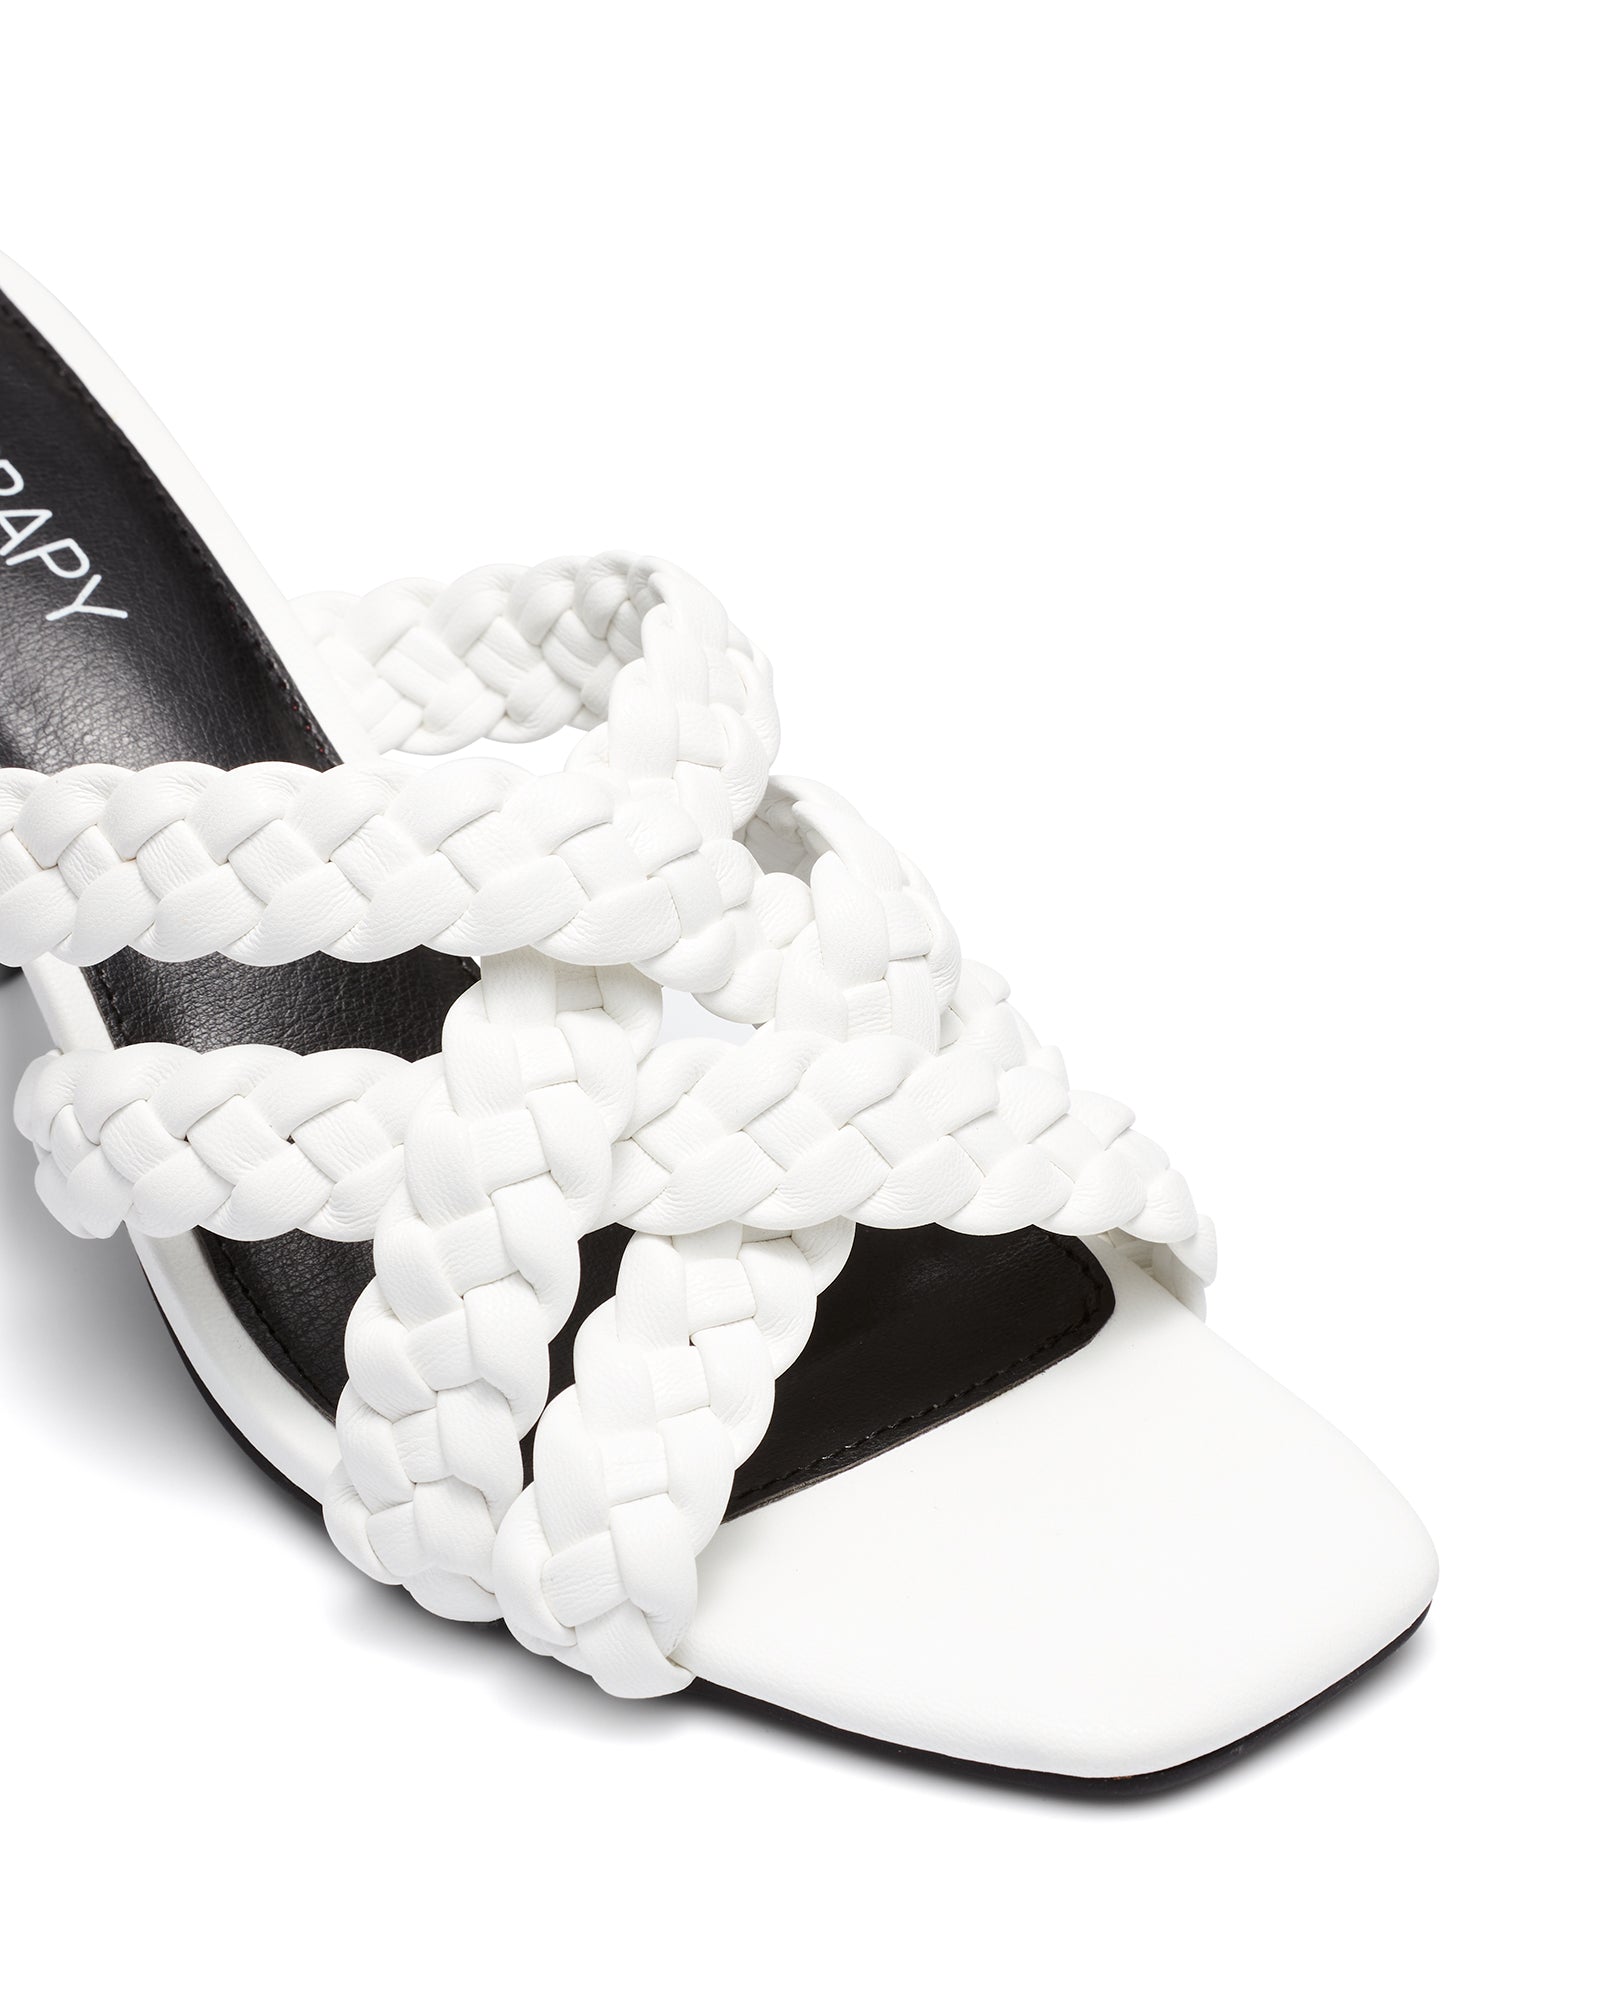 Therapy Shoes Kawaii White | Women's Heels | Sandals | Mule | Woven